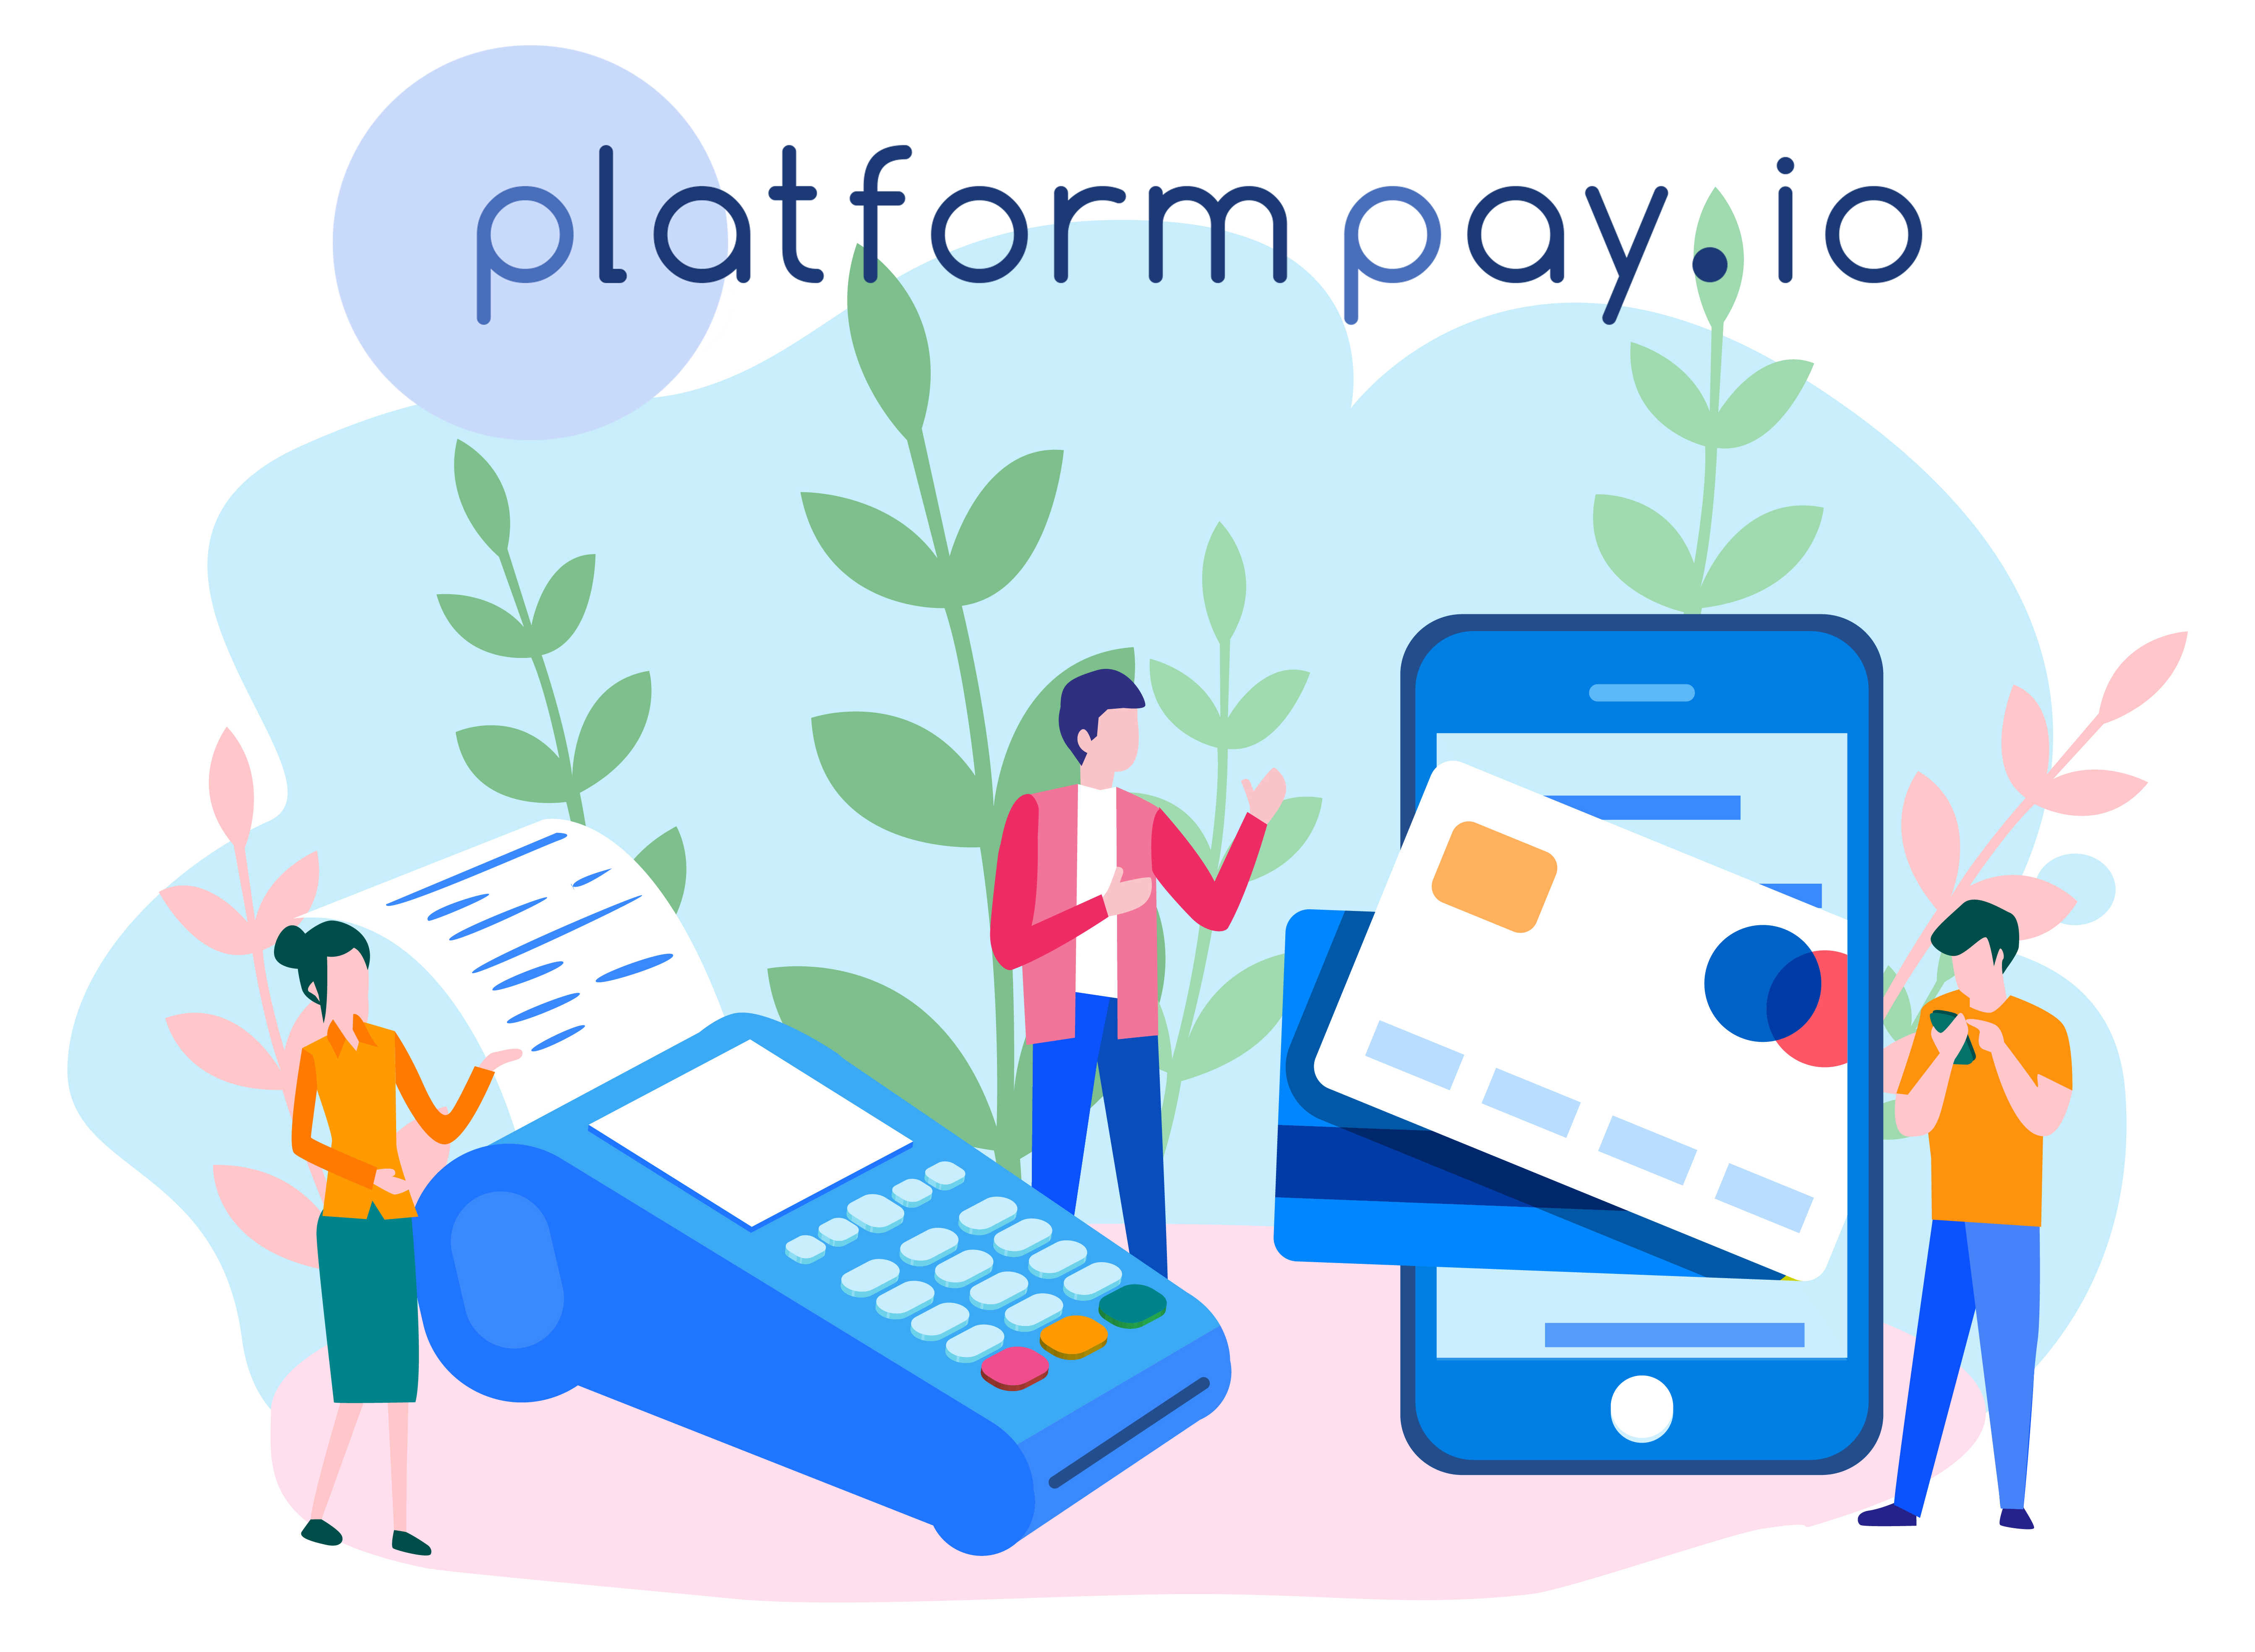 Refund Reduction and Beyond: The Impact of AI Integration by PlatformPay.io